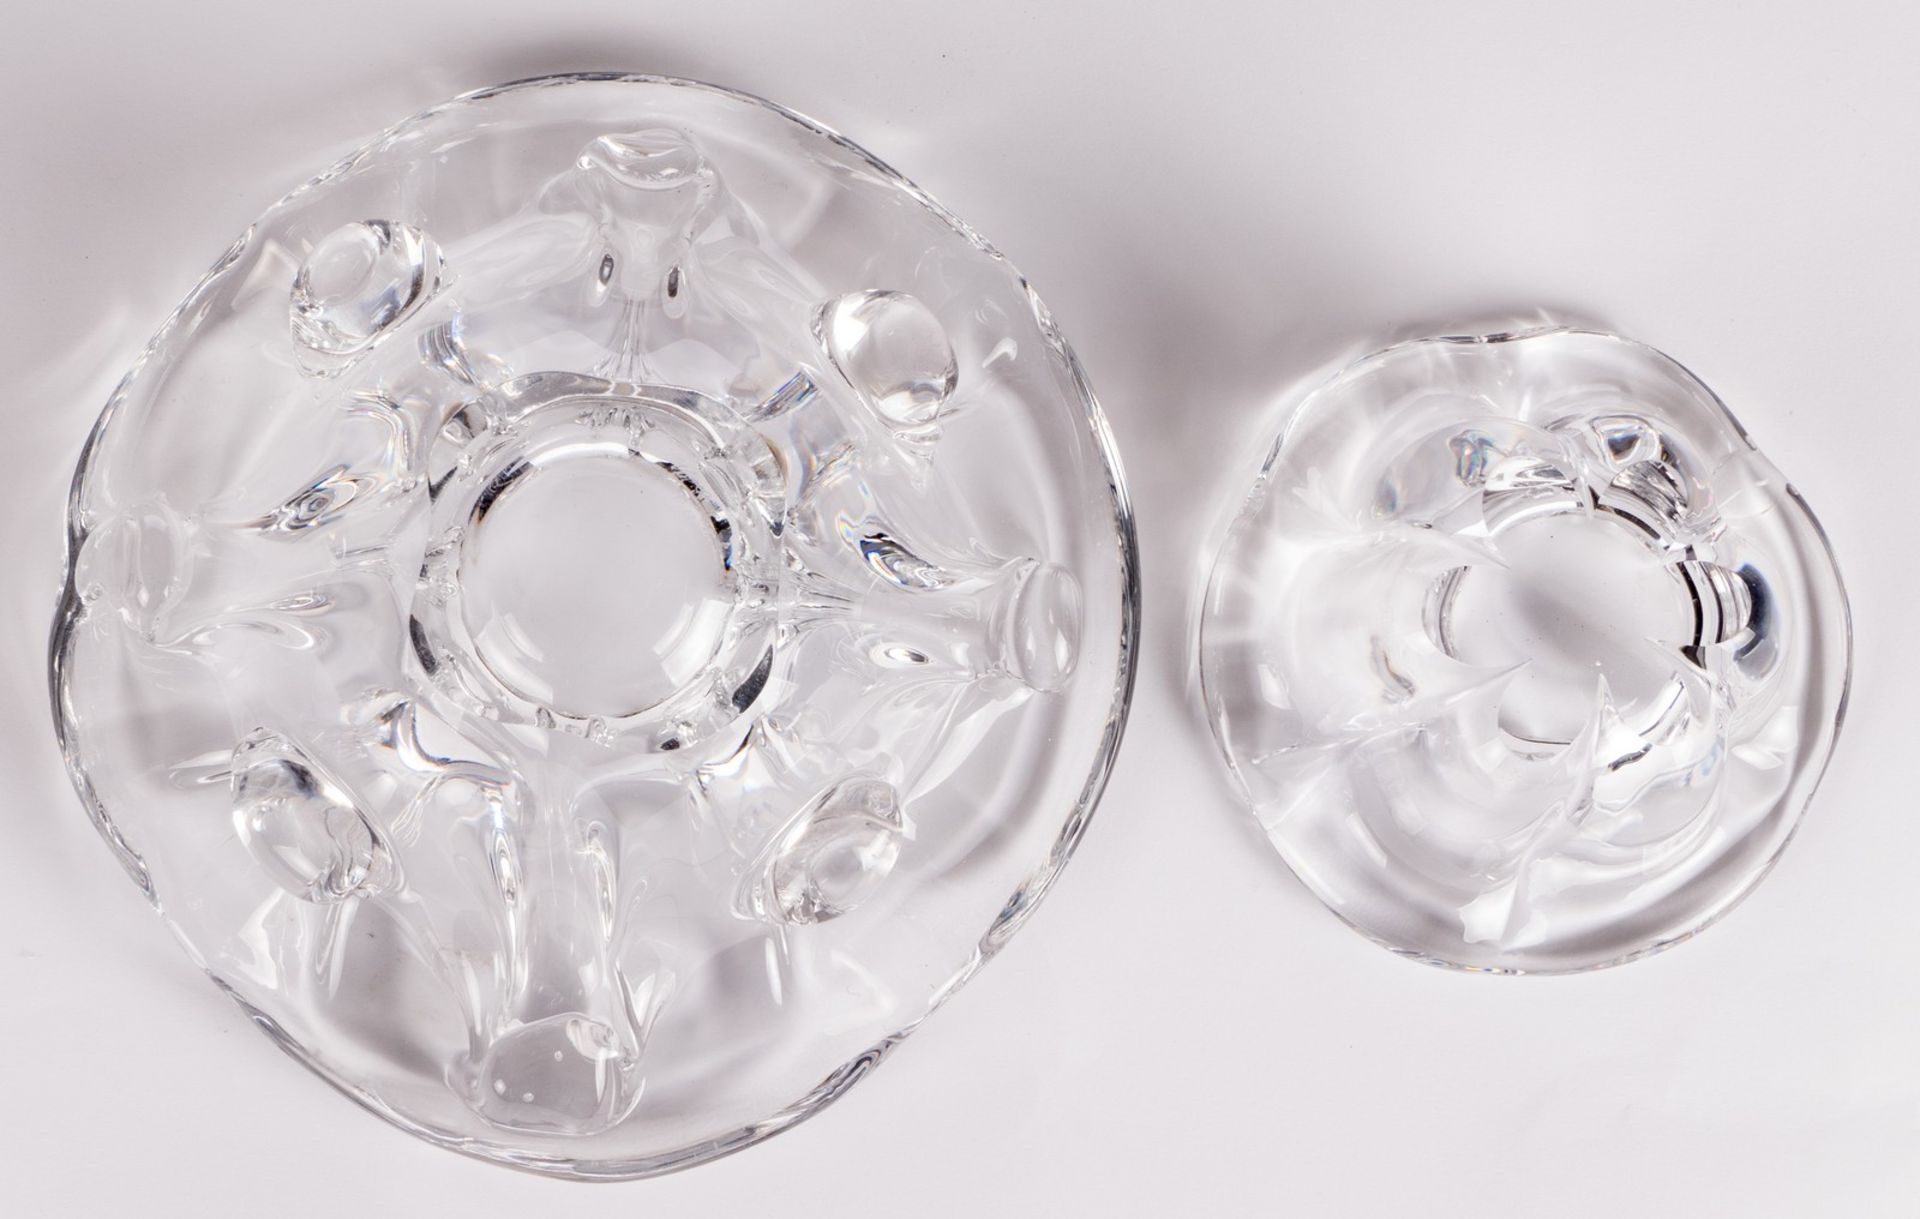 Two decorative bowls, crystal Val. St Lambert, Sixties, one is a pièce unique, Diameter 14,5 and - Bild 5 aus 8